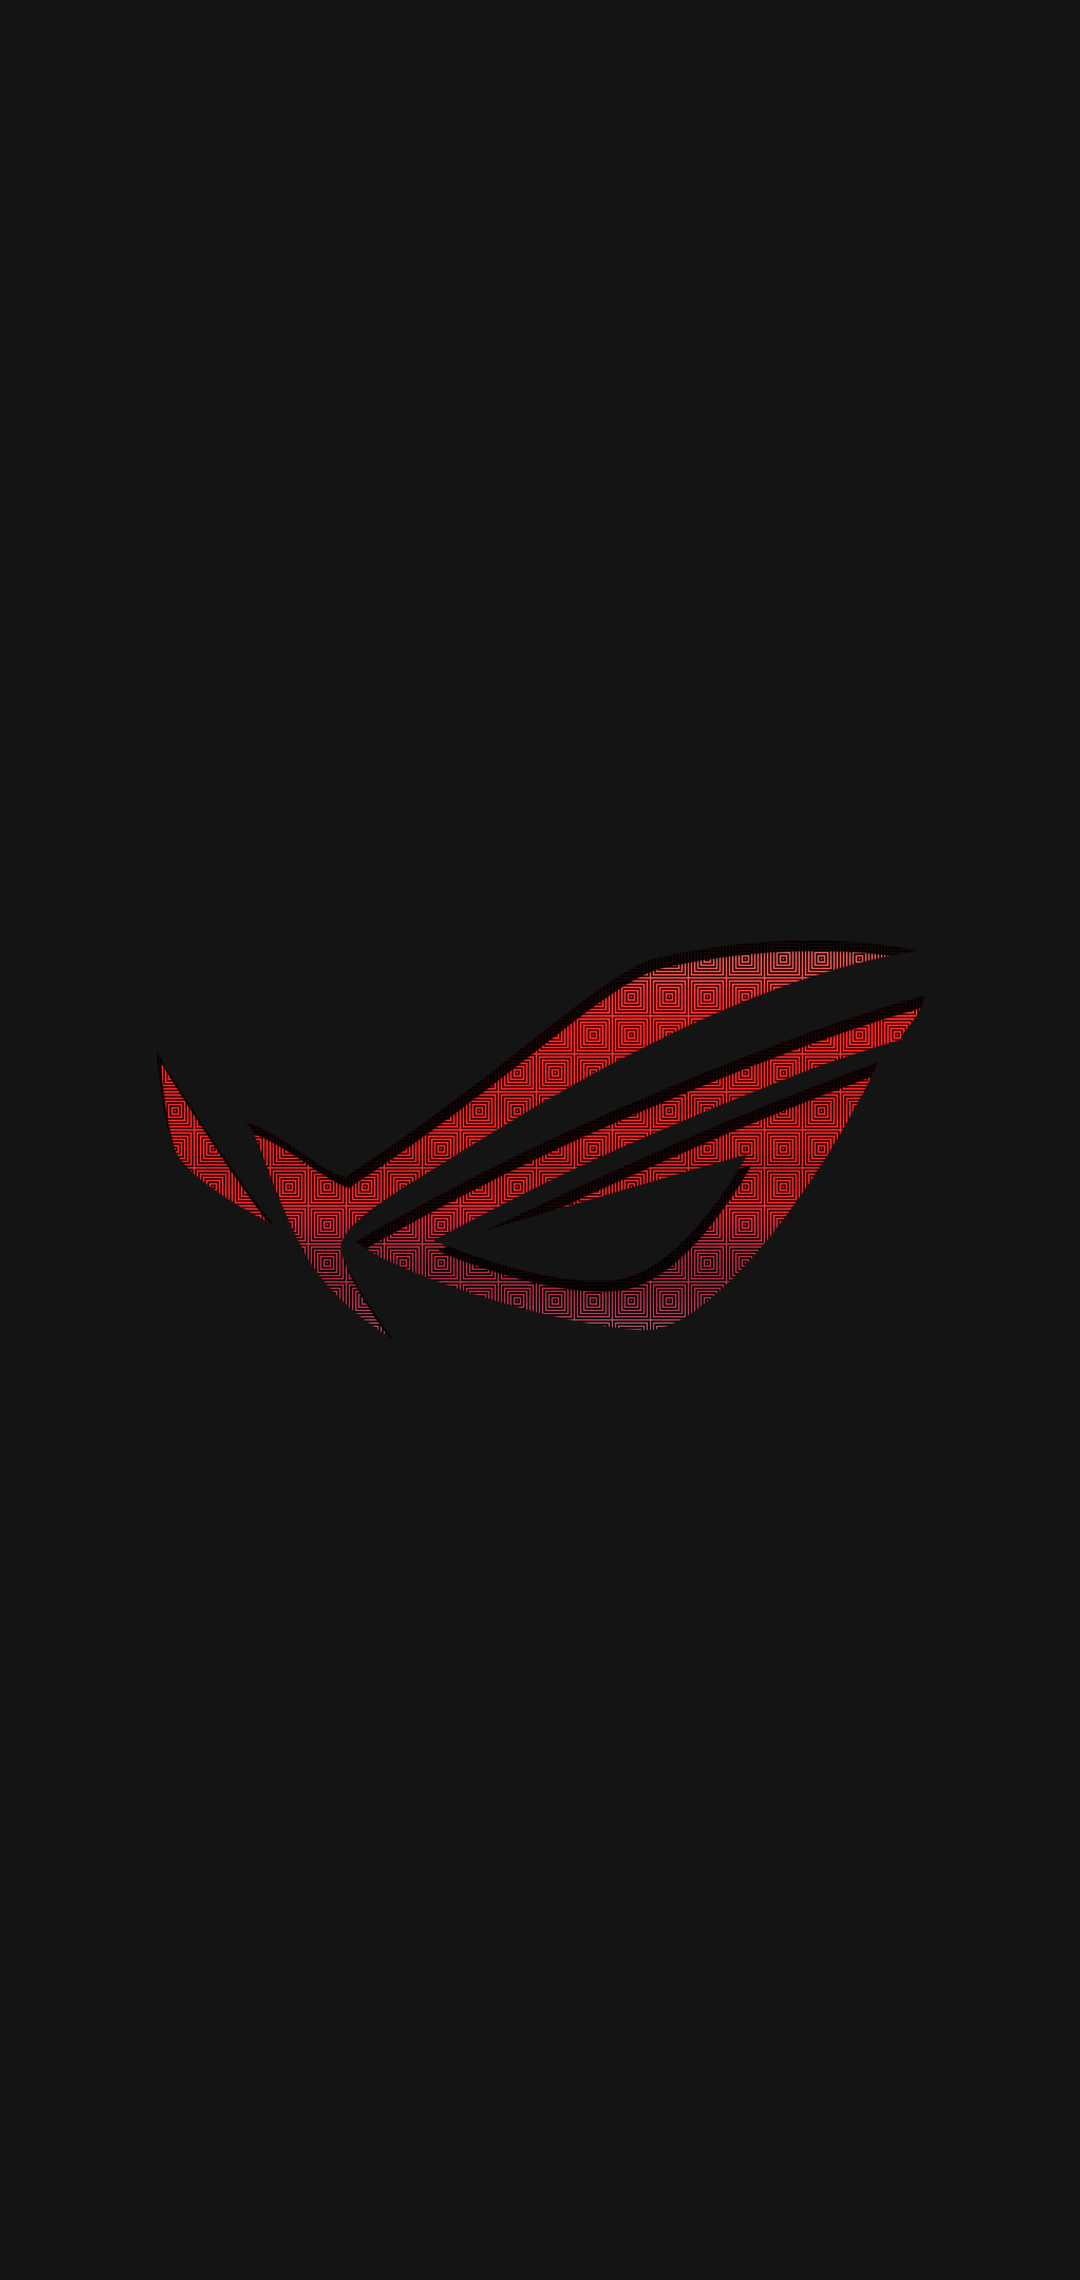 1080x2280 Rog Logo Art 4k One Plus 6,Huawei p20,Honor view 10,Vivo y85,Oppo  f7,Xiaomi Mi A2 HD 4k Wallpapers, Images, Backgrounds, Photos and Pictures